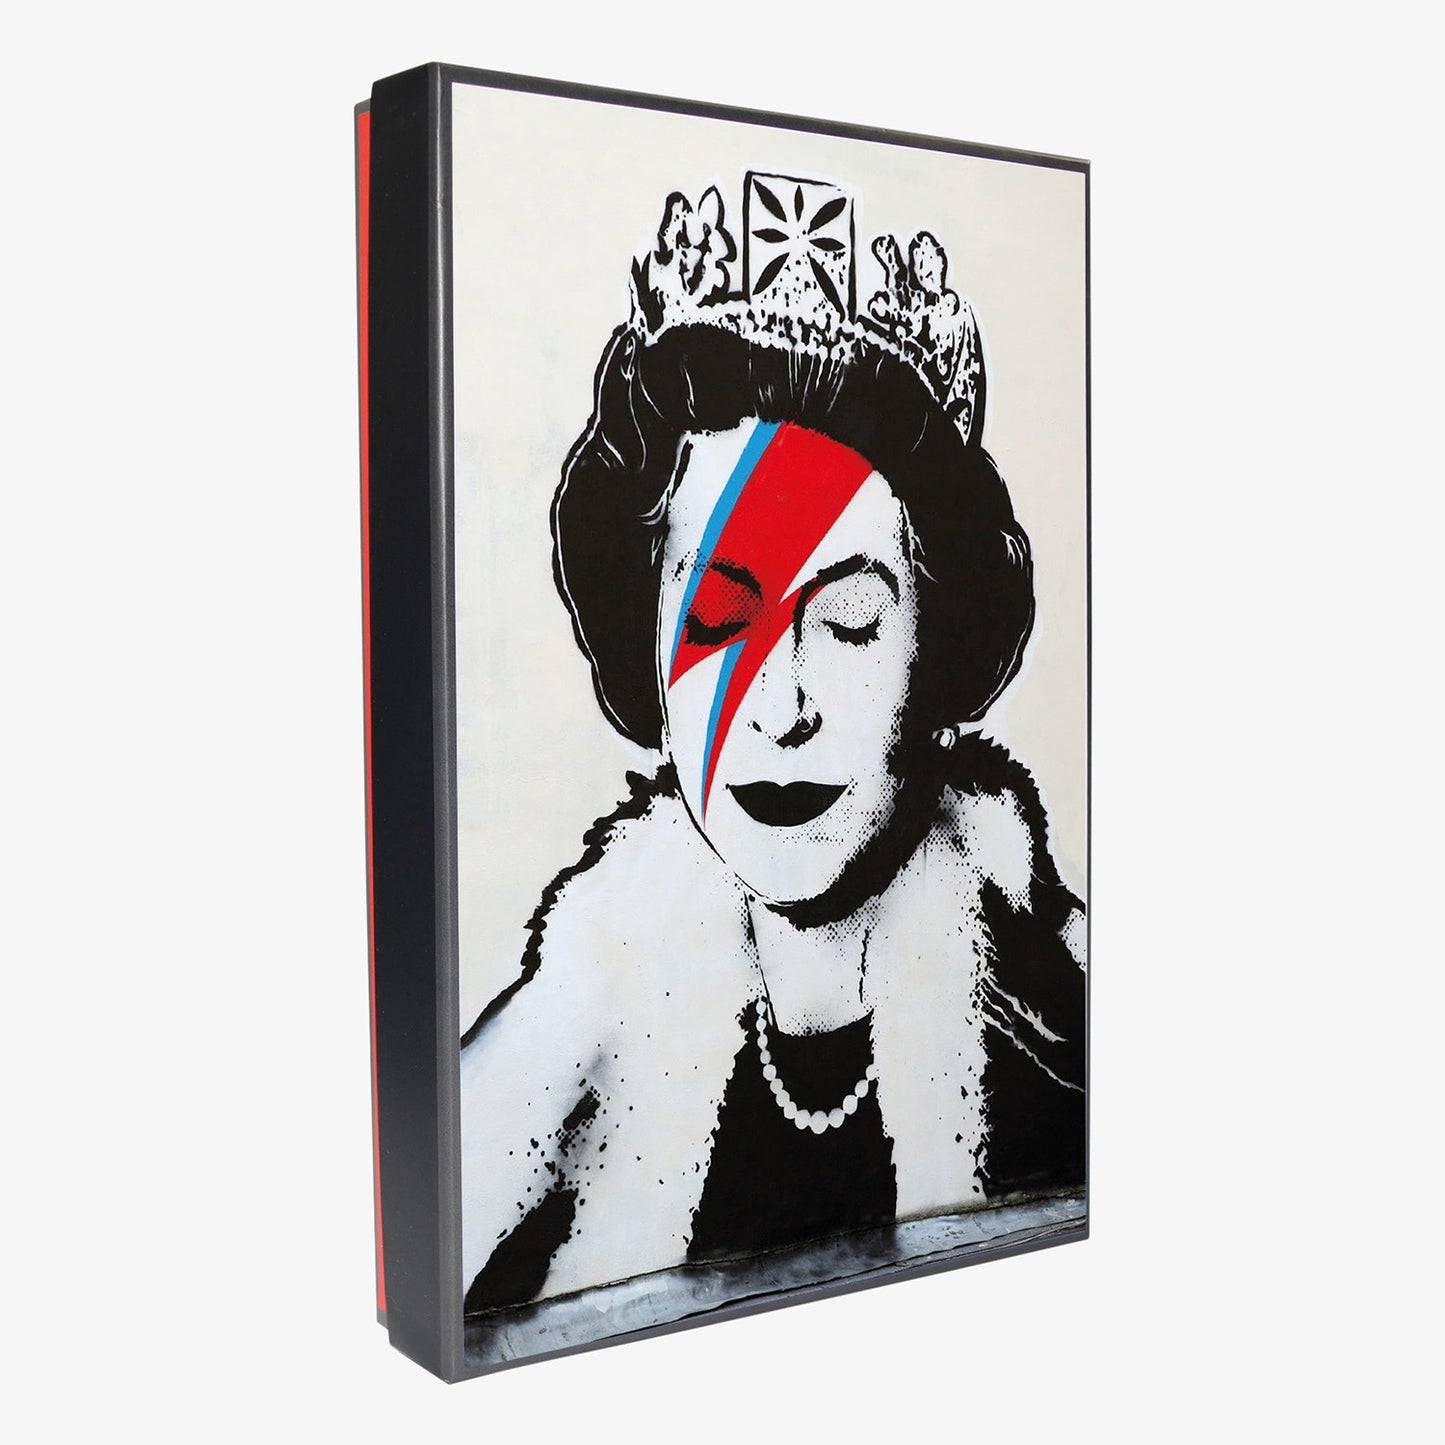 The world's most famous Graffiti - Lizzie Stardust - gift set